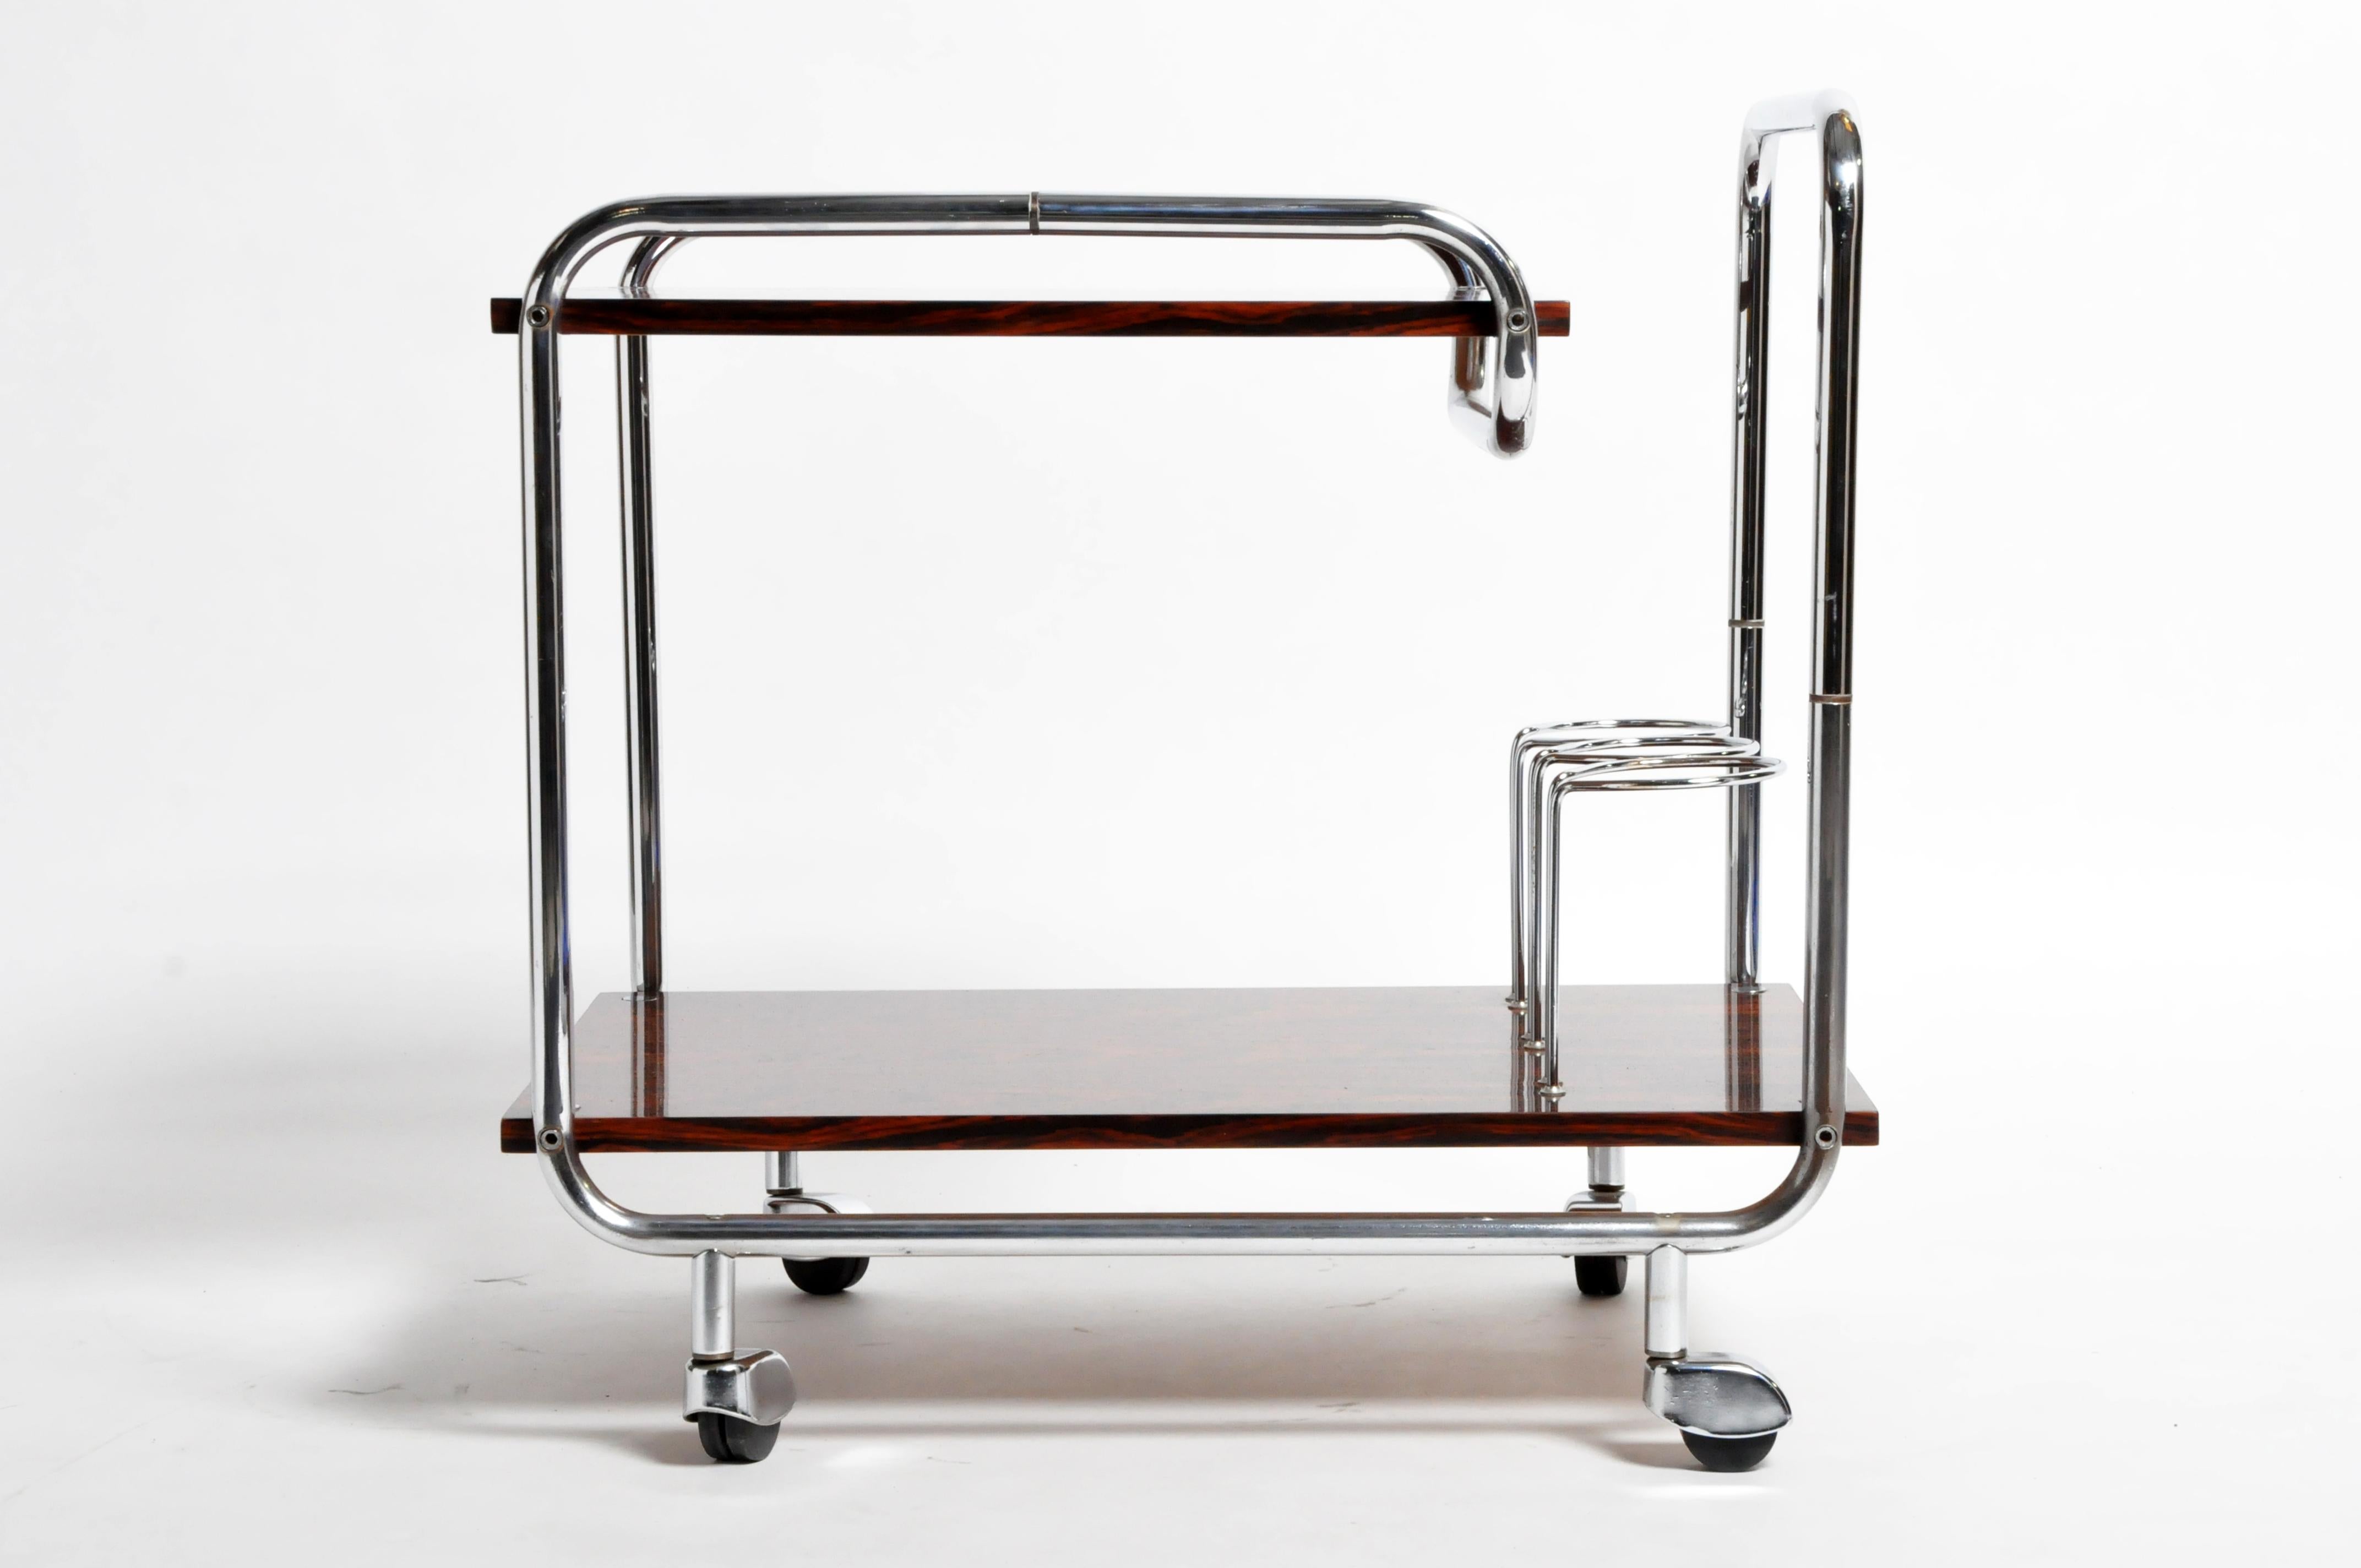 This elegant bar cart is from Hungary and was made from rosewood and chrome, circa 1960. The bar cart features 2 shelves, 3 bottle holders, wheels, and handle for easy transportation and movement. Wear consistent with age and use.